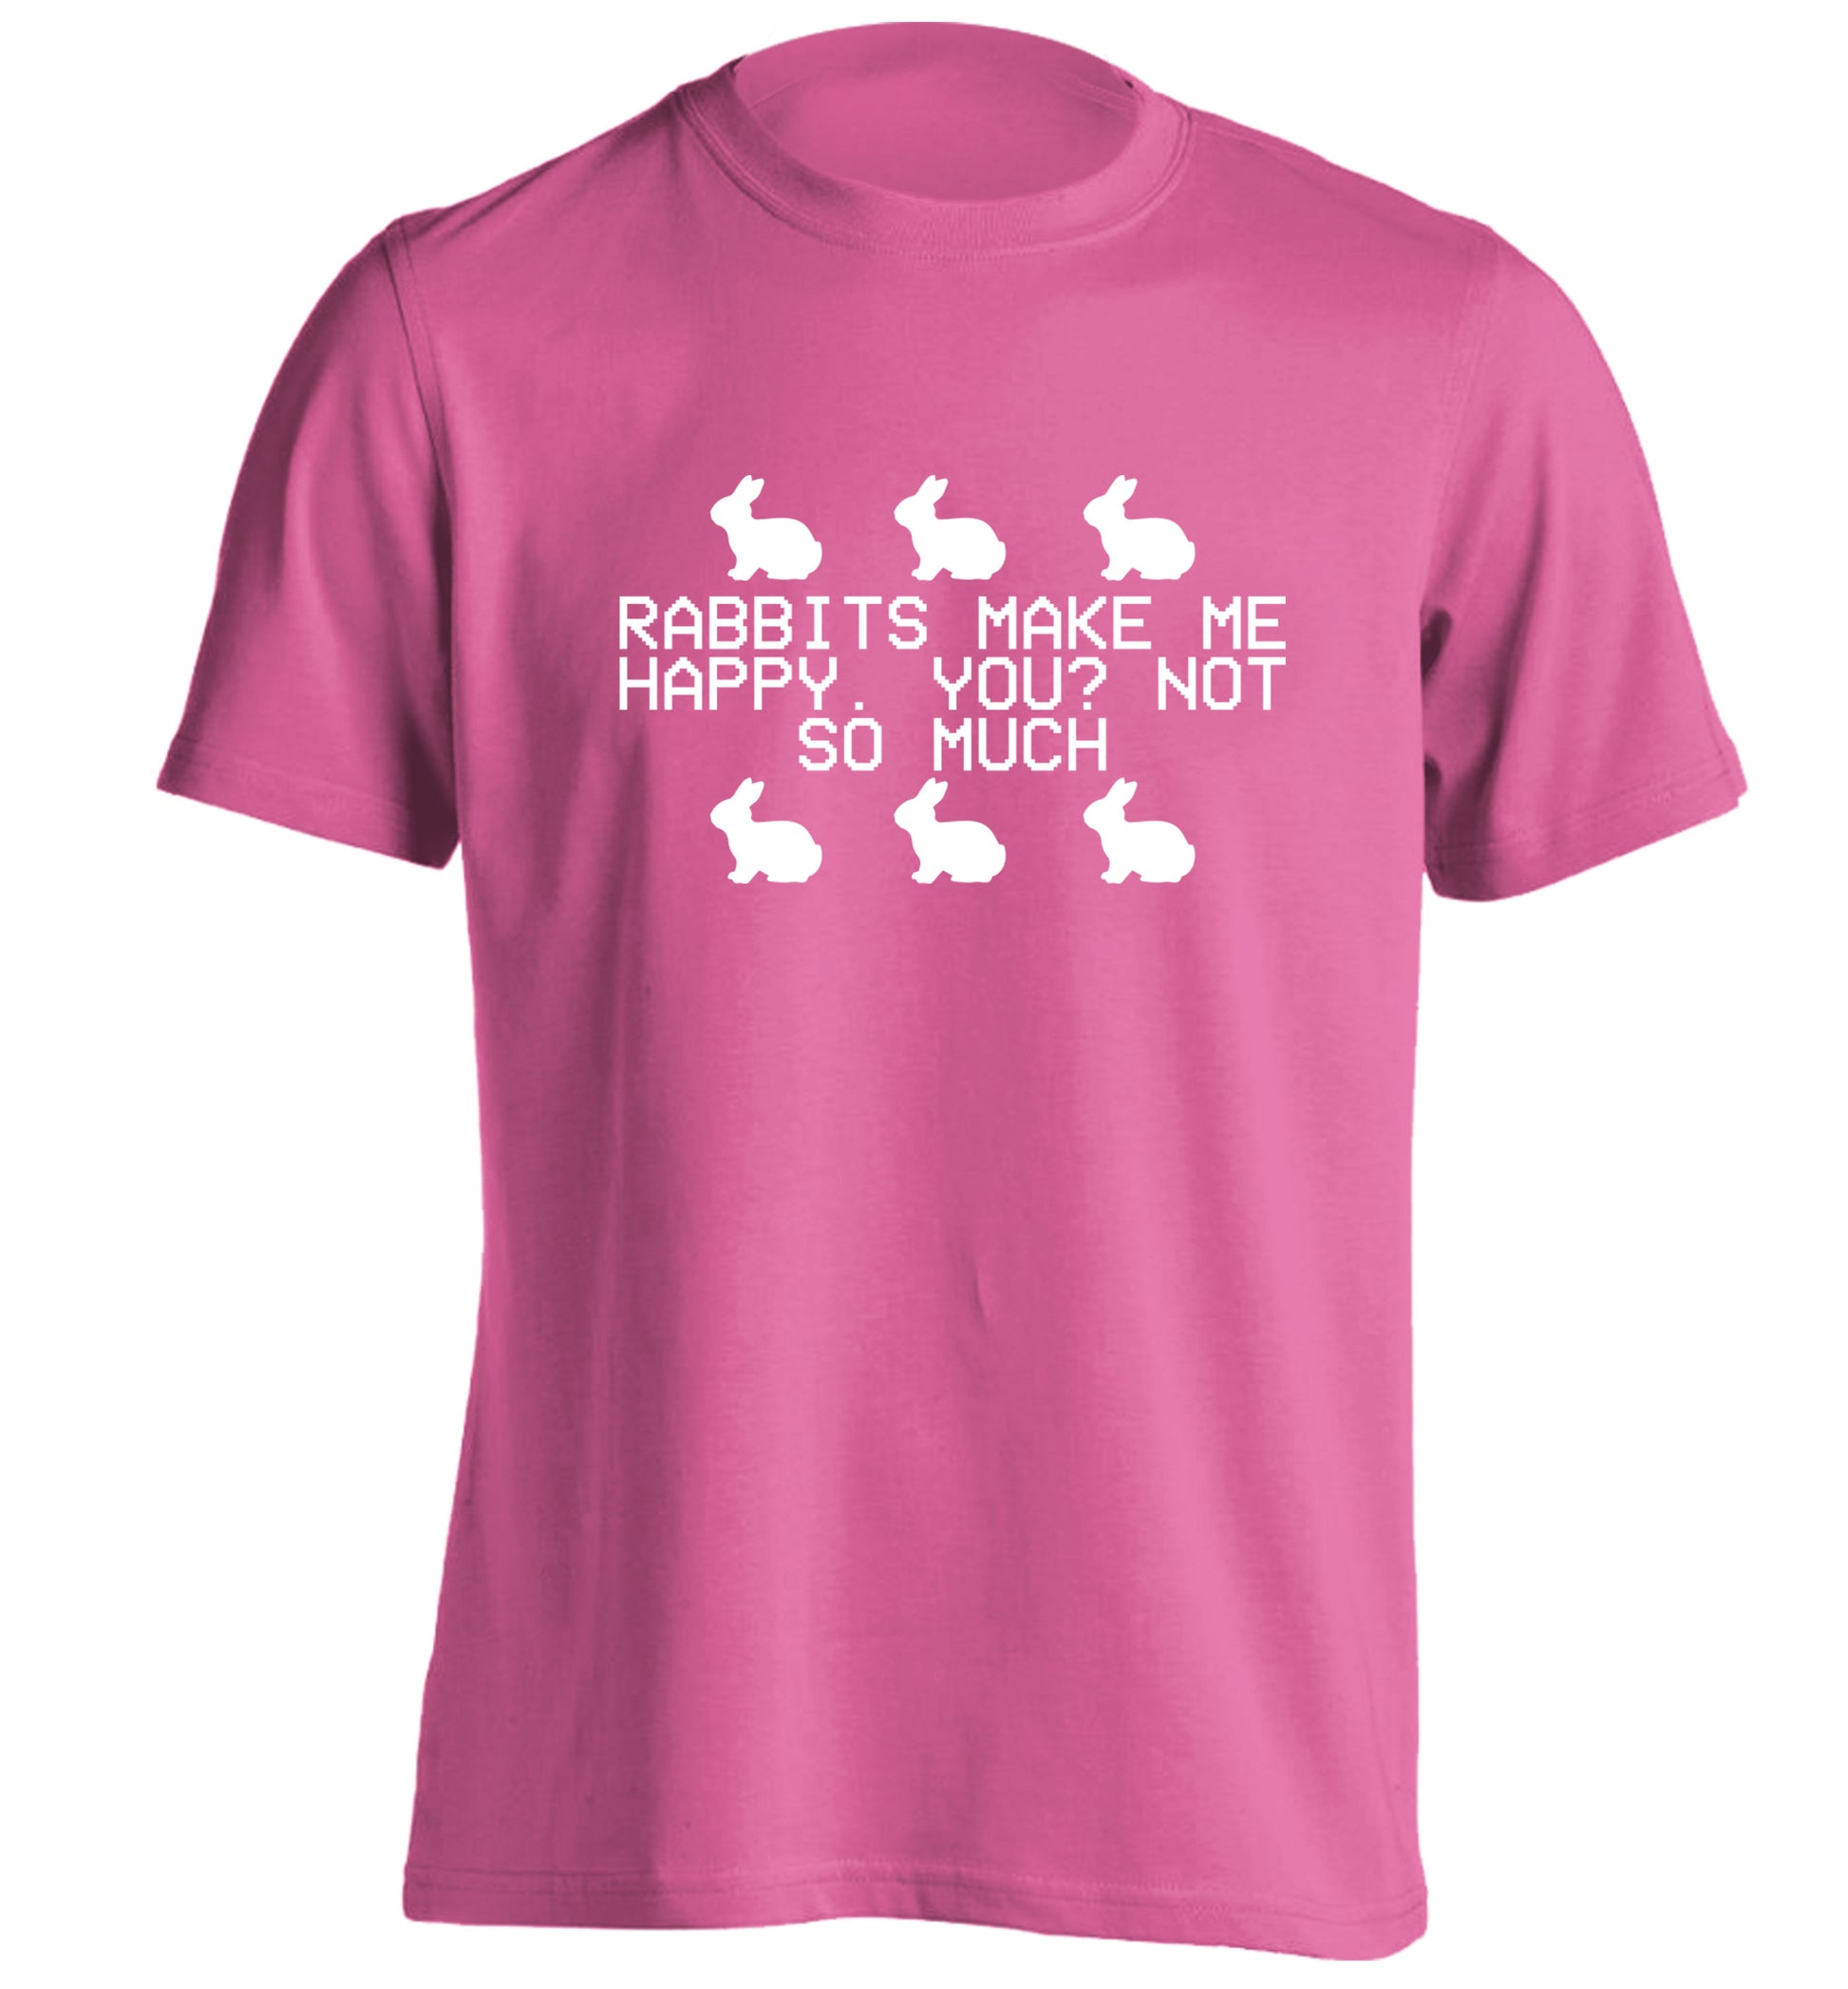 Rabbits make me happy, you not so much adults unisex pink Tshirt 2XL